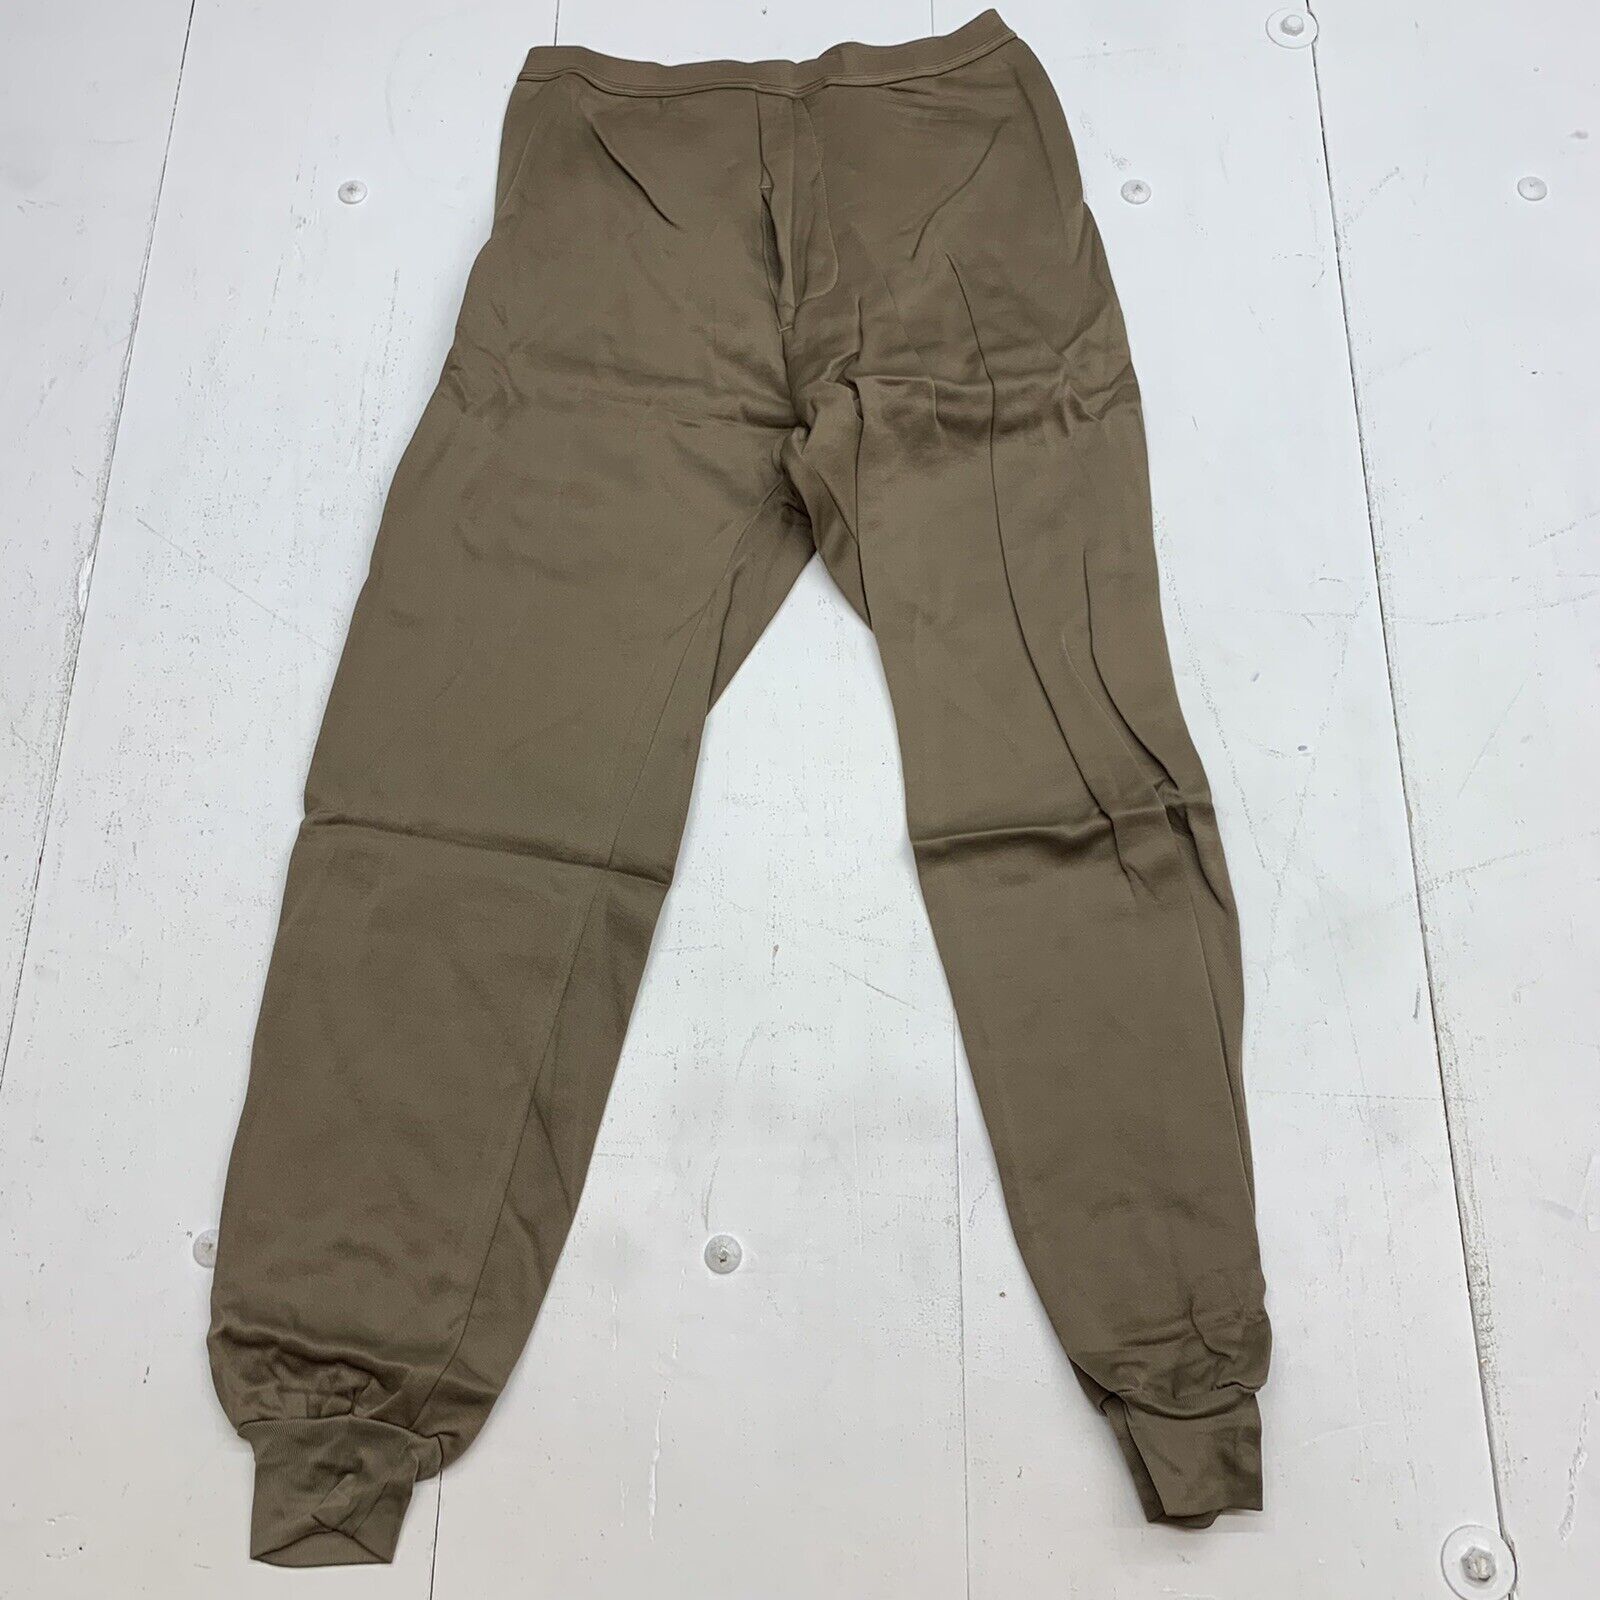 Mens Brown Cold Weather Pants Size XL